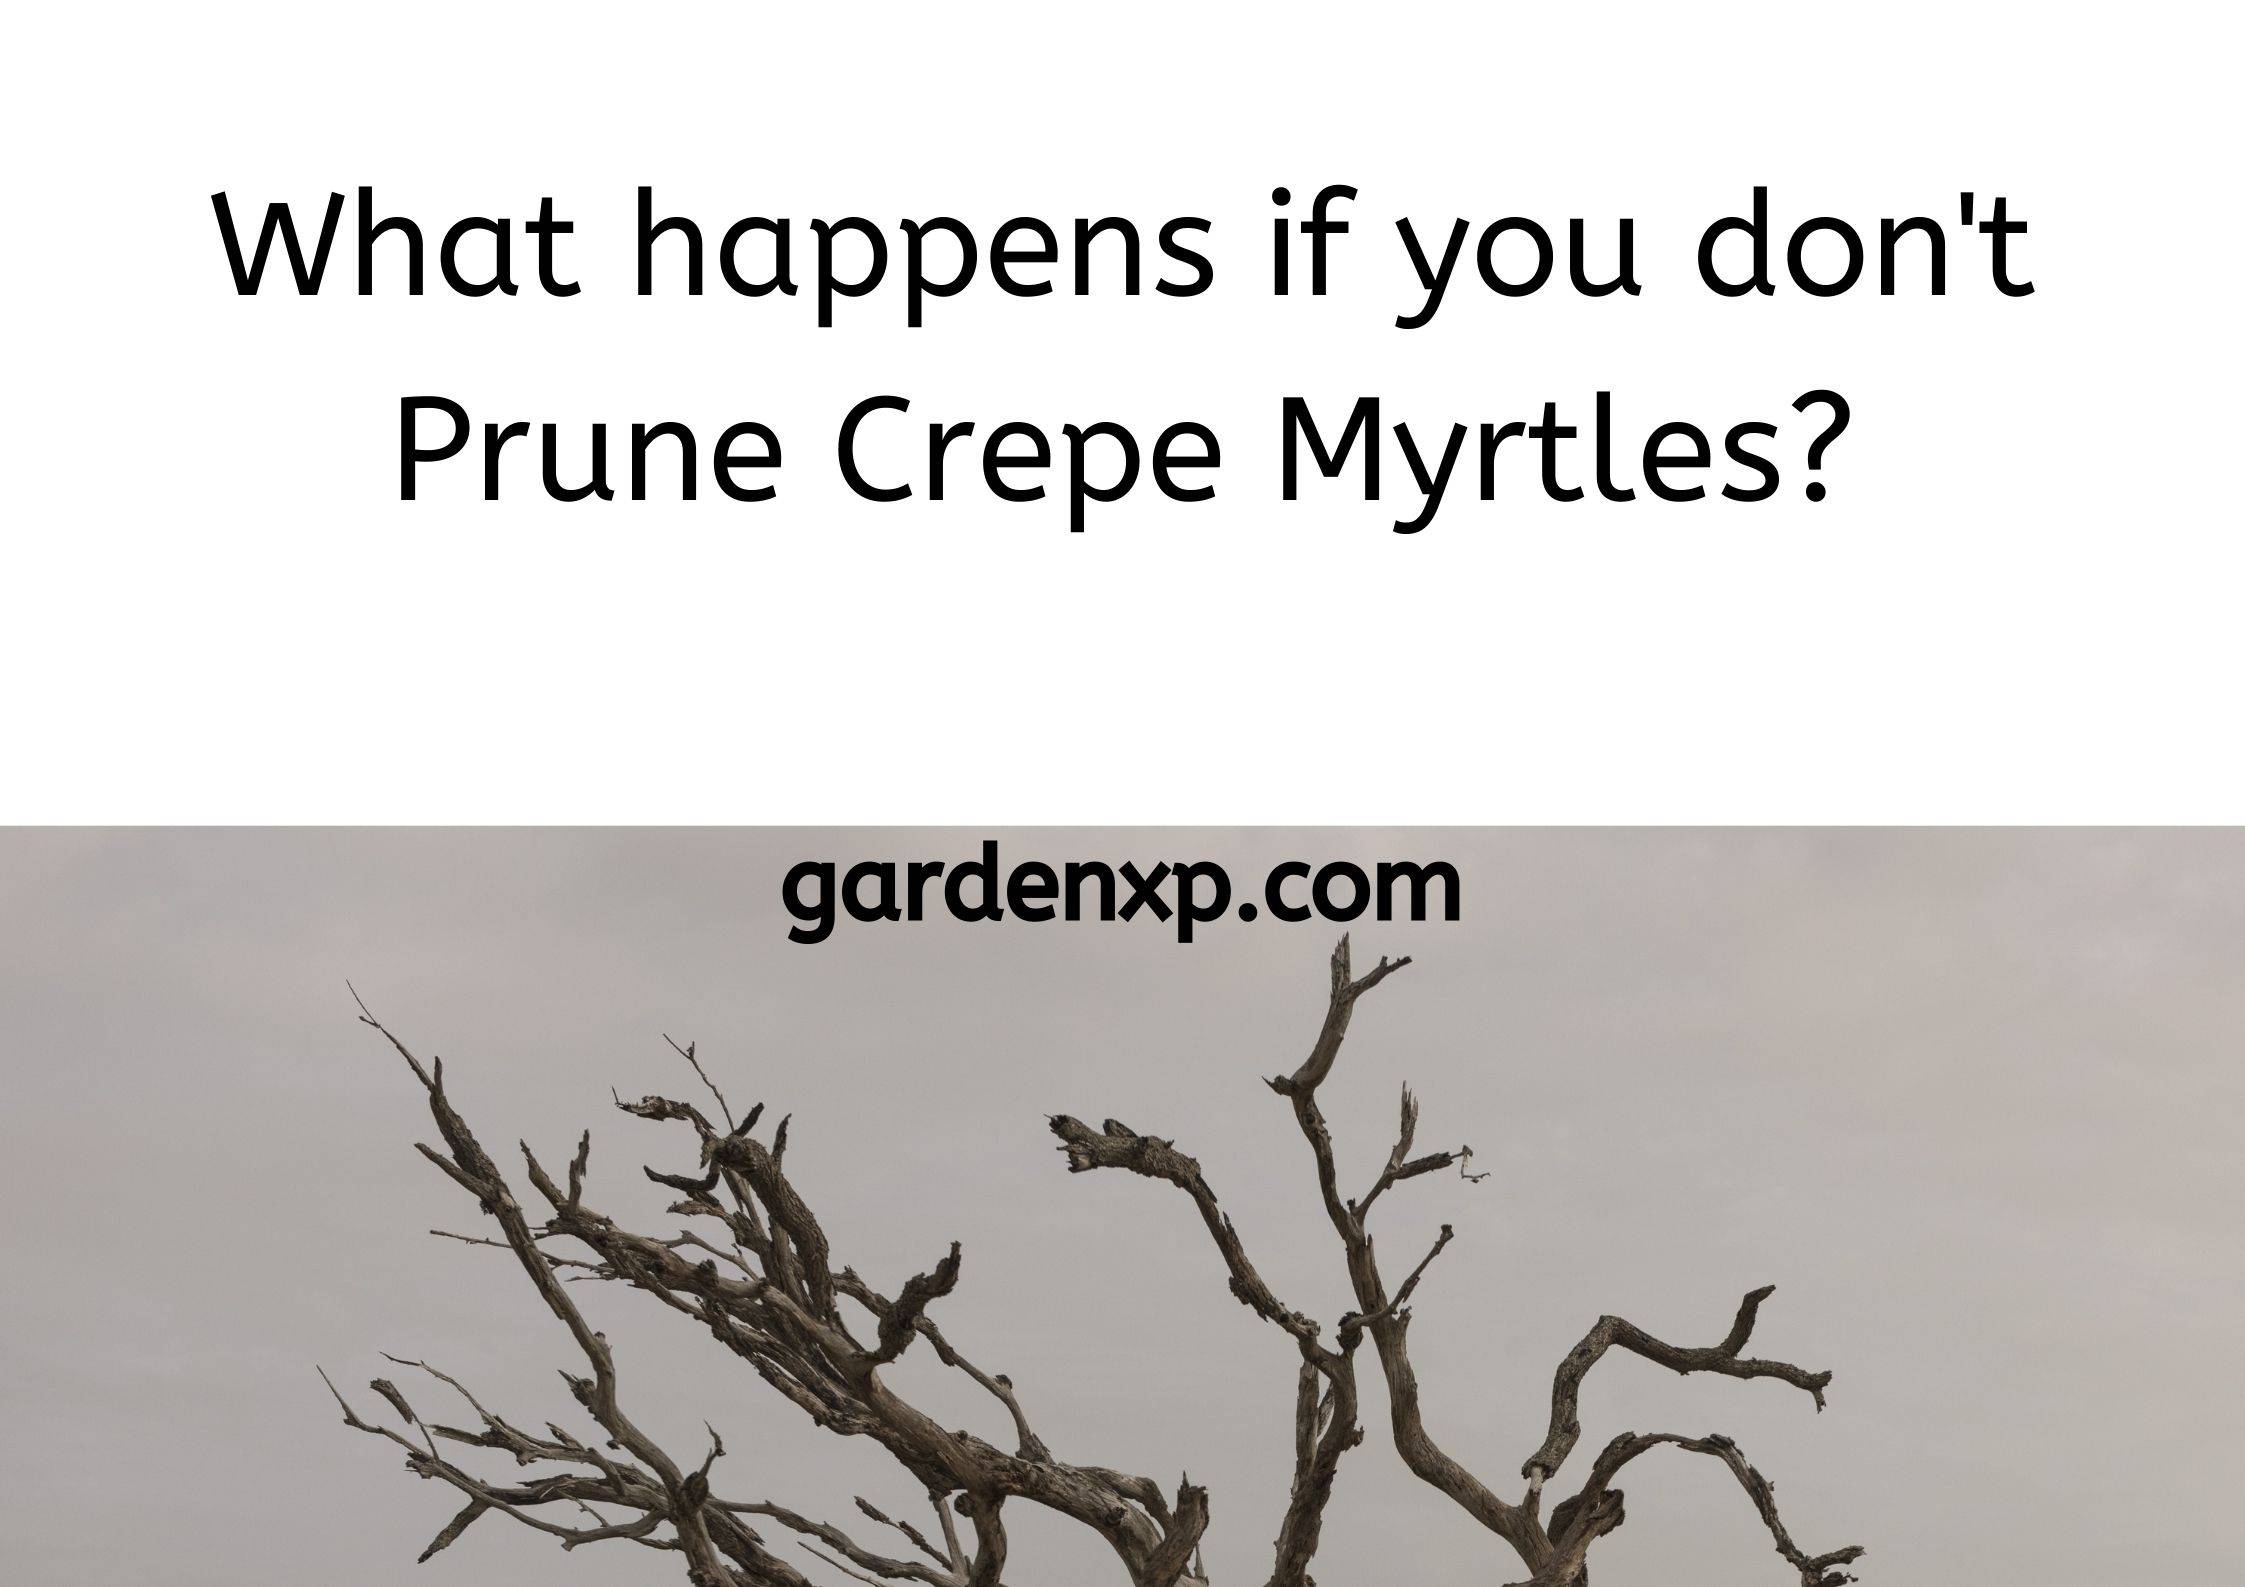 What happens if you don't Prune Crepe/Crape Myrtles?